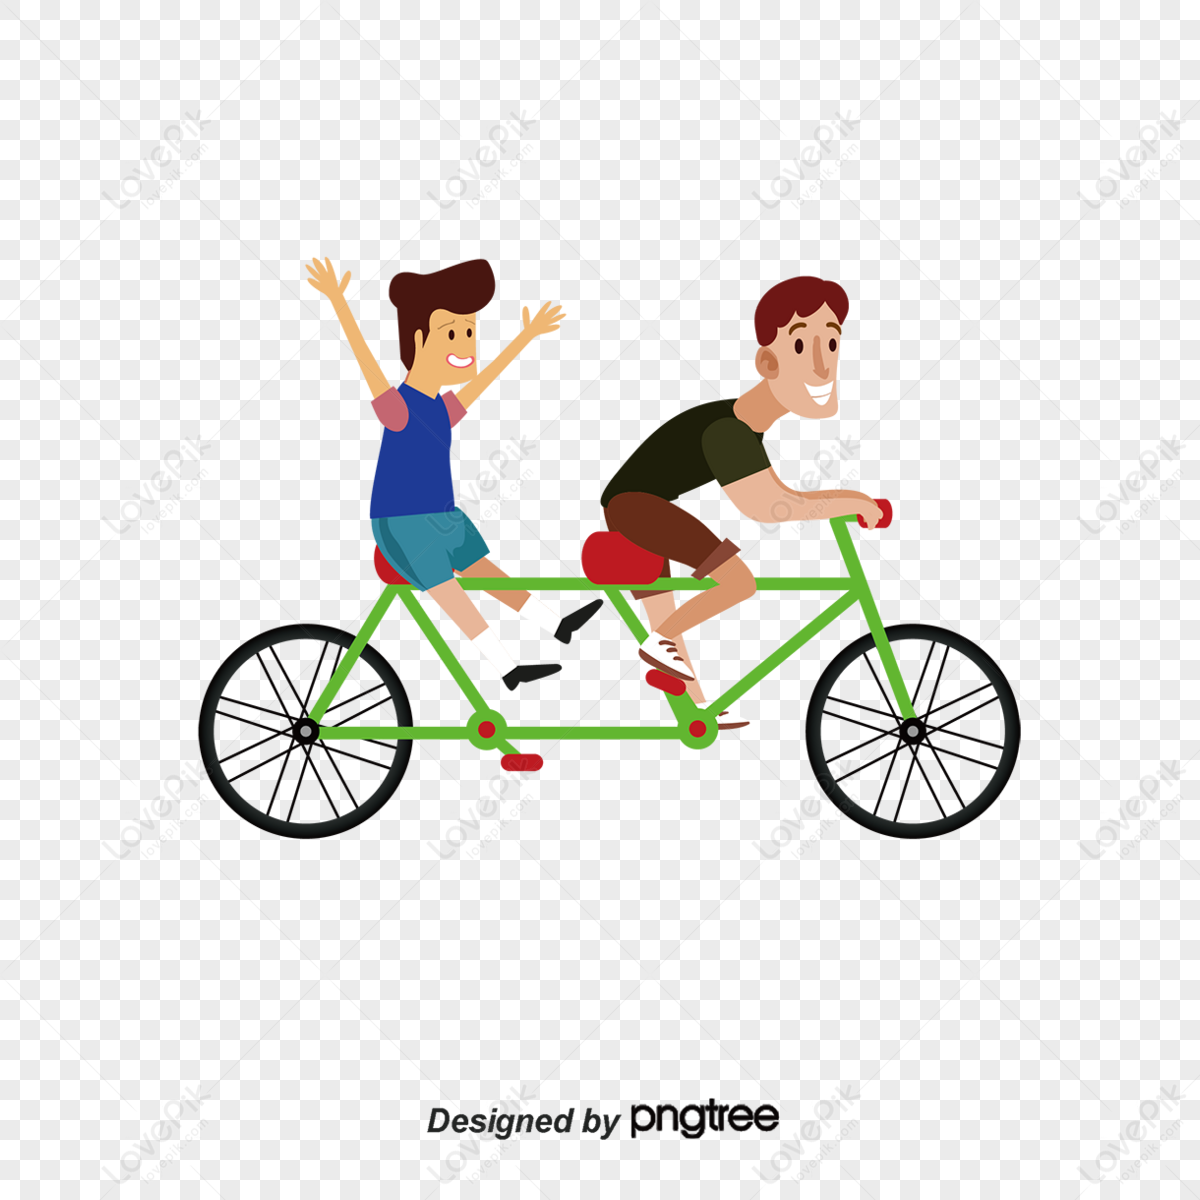 Bicycle headset accessories icon Royalty Free Vector Image